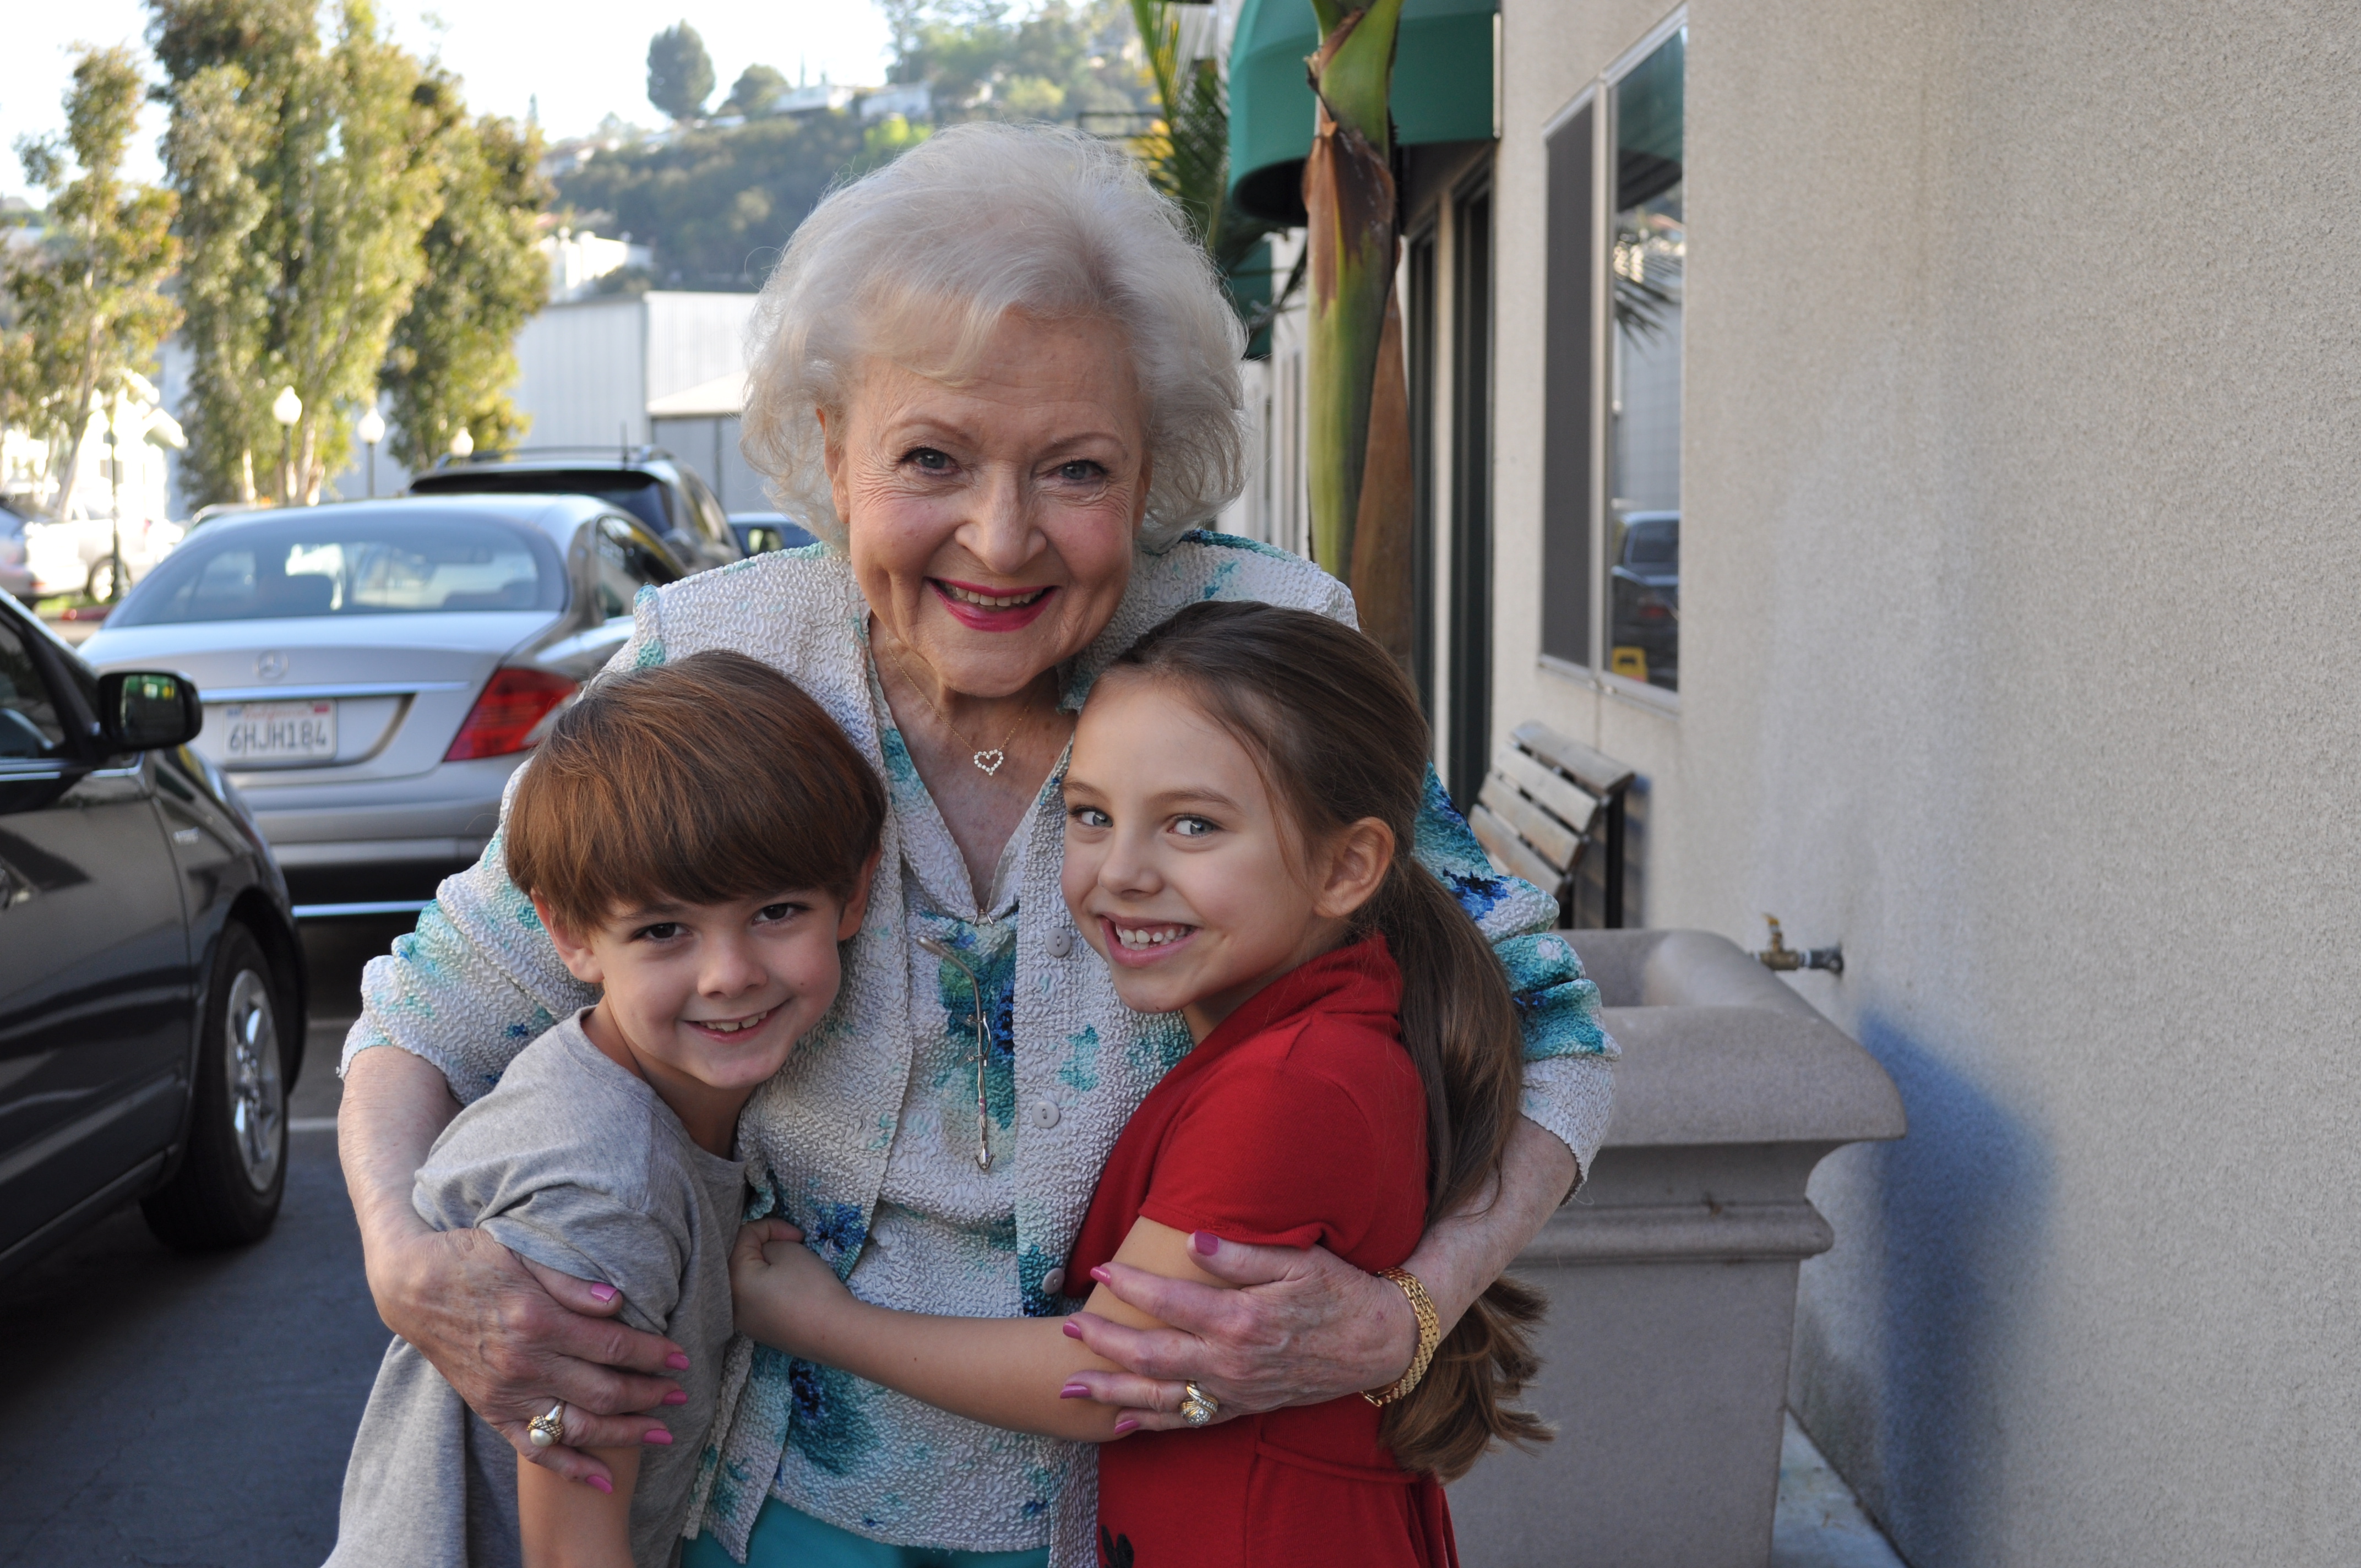 Caitlin Carmichael, Betty White & Max Charles on set of 